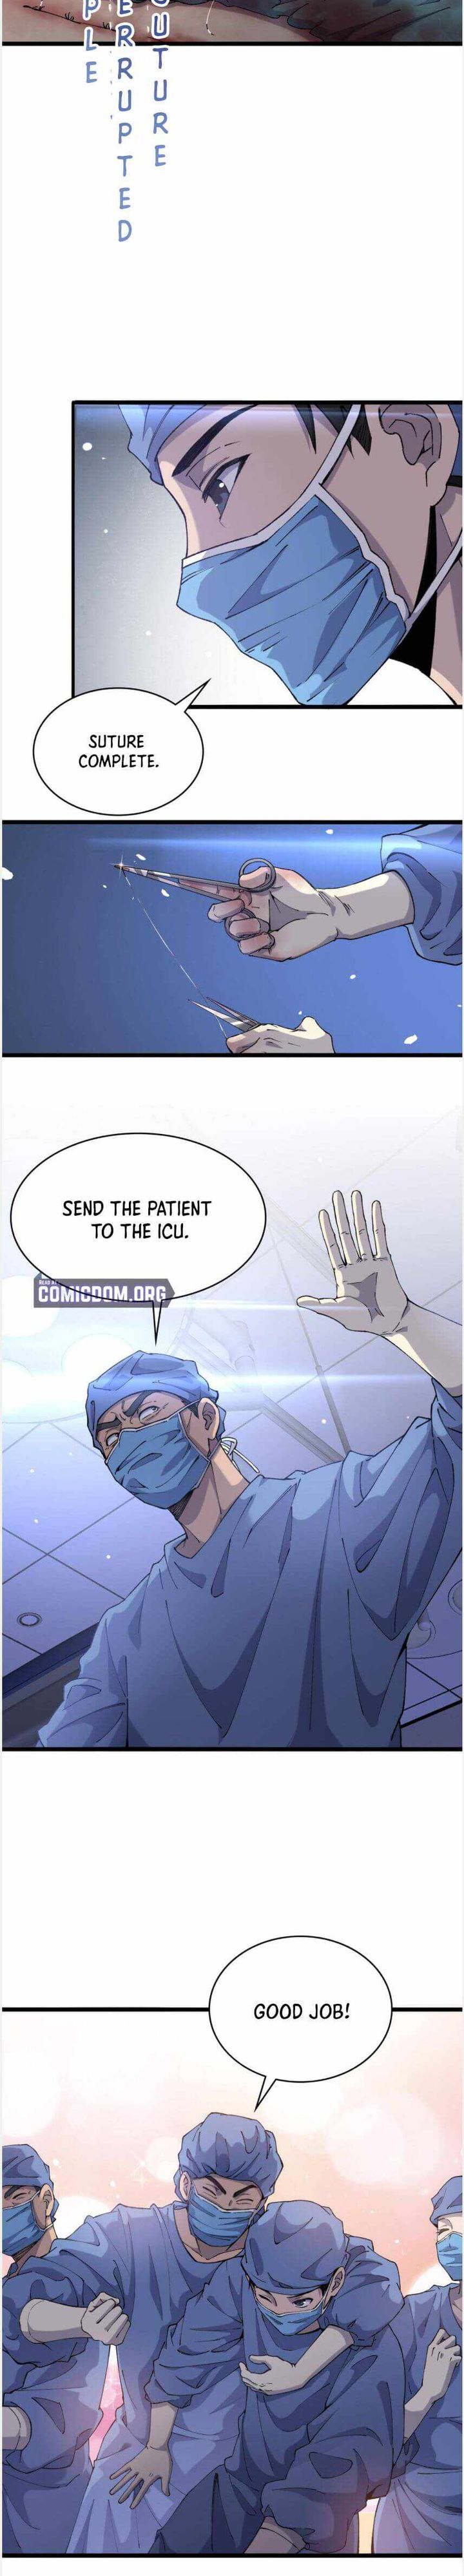 great_doctor_ling_ran_103_2